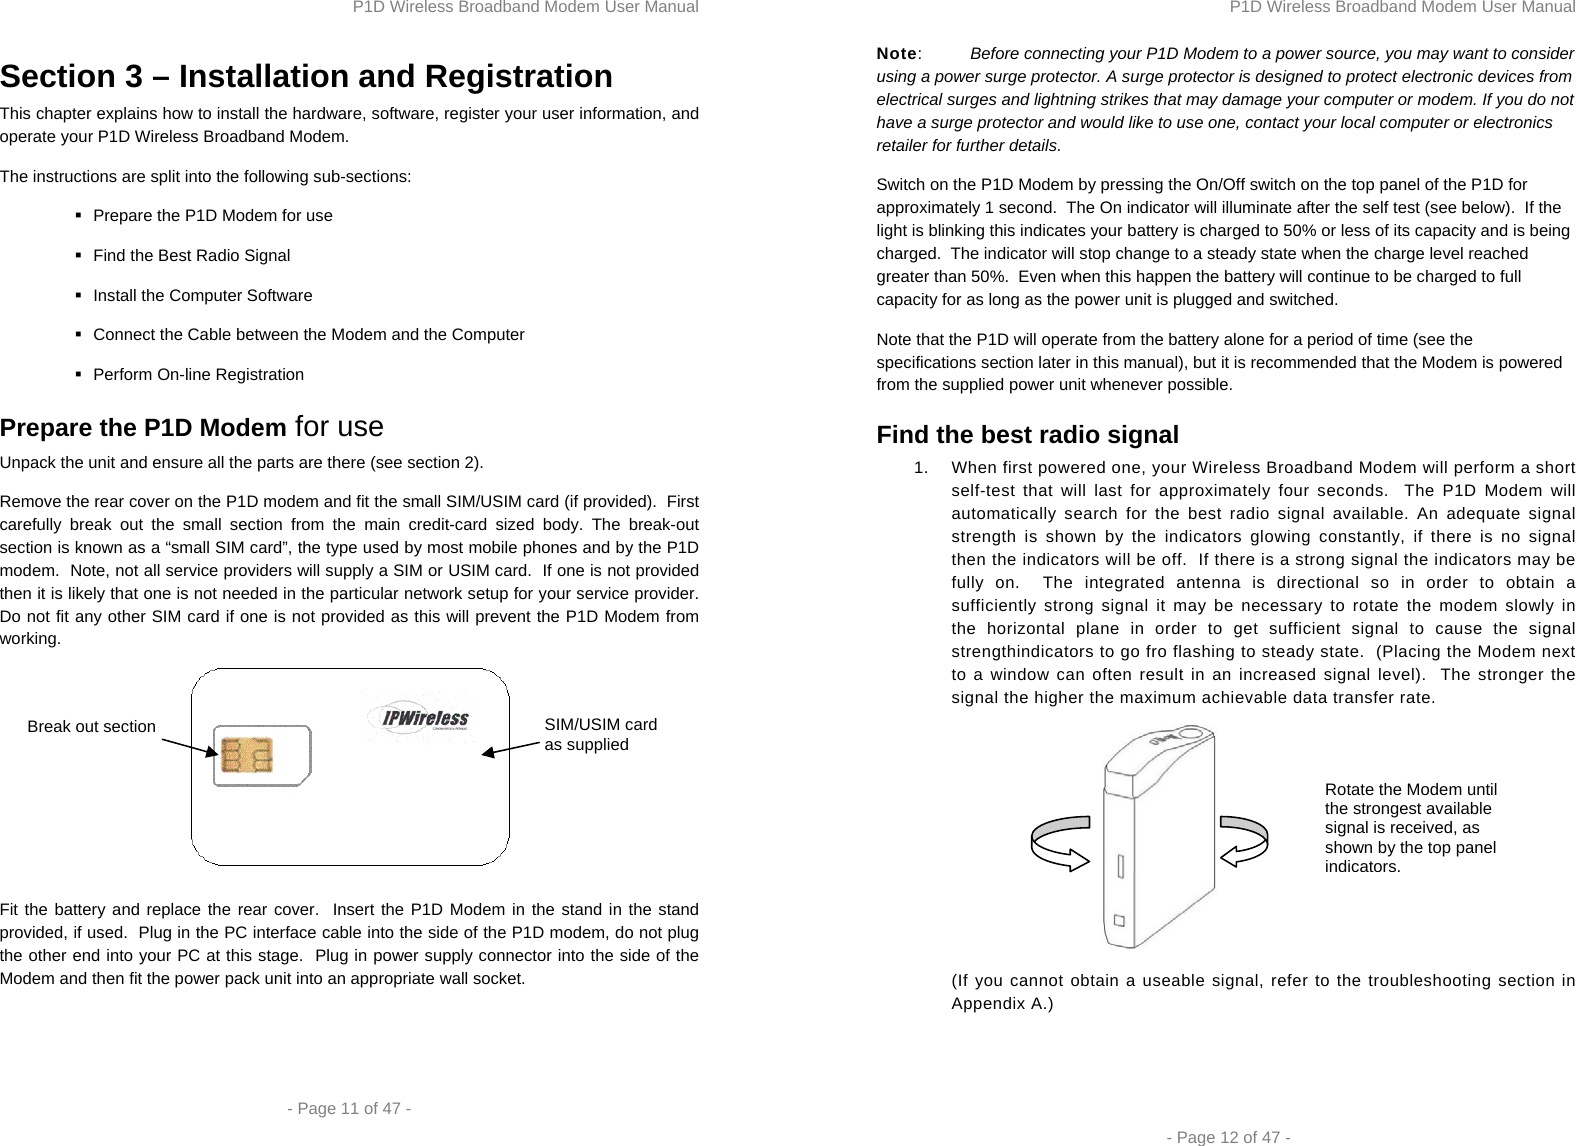 P1D Wireless Broadband Modem User Manual  - Page 11 of 47 -  Section 3 – Installation and Registration This chapter explains how to install the hardware, software, register your user information, and operate your P1D Wireless Broadband Modem.  The instructions are split into the following sub-sections:   Prepare the P1D Modem for use   Find the Best Radio Signal   Install the Computer Software    Connect the Cable between the Modem and the Computer   Perform On-line Registration Prepare the P1D Modem for use Unpack the unit and ensure all the parts are there (see section 2). Remove the rear cover on the P1D modem and fit the small SIM/USIM card (if provided).  First carefully break out the small section from the main credit-card sized body. The break-out section is known as a “small SIM card”, the type used by most mobile phones and by the P1D modem.  Note, not all service providers will supply a SIM or USIM card.  If one is not provided then it is likely that one is not needed in the particular network setup for your service provider.  Do not fit any other SIM card if one is not provided as this will prevent the P1D Modem from working.   Fit the battery and replace the rear cover.  Insert the P1D Modem in the stand in the stand provided, if used.  Plug in the PC interface cable into the side of the P1D modem, do not plug the other end into your PC at this stage.  Plug in power supply connector into the side of the Modem and then fit the power pack unit into an appropriate wall socket.  SIM/USIM card as supplied Break out section P1D Wireless Broadband Modem User Manual  - Page 12 of 47 - Note:  Before connecting your P1D Modem to a power source, you may want to consider using a power surge protector. A surge protector is designed to protect electronic devices from electrical surges and lightning strikes that may damage your computer or modem. If you do not have a surge protector and would like to use one, contact your local computer or electronics retailer for further details.  Switch on the P1D Modem by pressing the On/Off switch on the top panel of the P1D for approximately 1 second.  The On indicator will illuminate after the self test (see below).  If the light is blinking this indicates your battery is charged to 50% or less of its capacity and is being charged.  The indicator will stop change to a steady state when the charge level reached greater than 50%.  Even when this happen the battery will continue to be charged to full capacity for as long as the power unit is plugged and switched. Note that the P1D will operate from the battery alone for a period of time (see the specifications section later in this manual), but it is recommended that the Modem is powered from the supplied power unit whenever possible. Find the best radio signal 1.  When first powered one, your Wireless Broadband Modem will perform a short self-test that will last for approximately four seconds.  The P1D Modem will automatically search for the best radio signal available. An adequate signal strength is shown by the indicators glowing constantly, if there is no signal then the indicators will be off.  If there is a strong signal the indicators may be fully on.  The integrated antenna is directional so in order to obtain a sufficiently strong signal it may be necessary to rotate the modem slowly in the horizontal plane in order to get sufficient signal to cause the signal strengthindicators to go fro flashing to steady state.  (Placing the Modem next to a window can often result in an increased signal level).  The stronger the signal the higher the maximum achievable data transfer rate.  (If you cannot obtain a useable signal, refer to the troubleshooting section in Appendix A.)  Rotate the Modem until the strongest available signal is received, as shown by the top panel indicators.